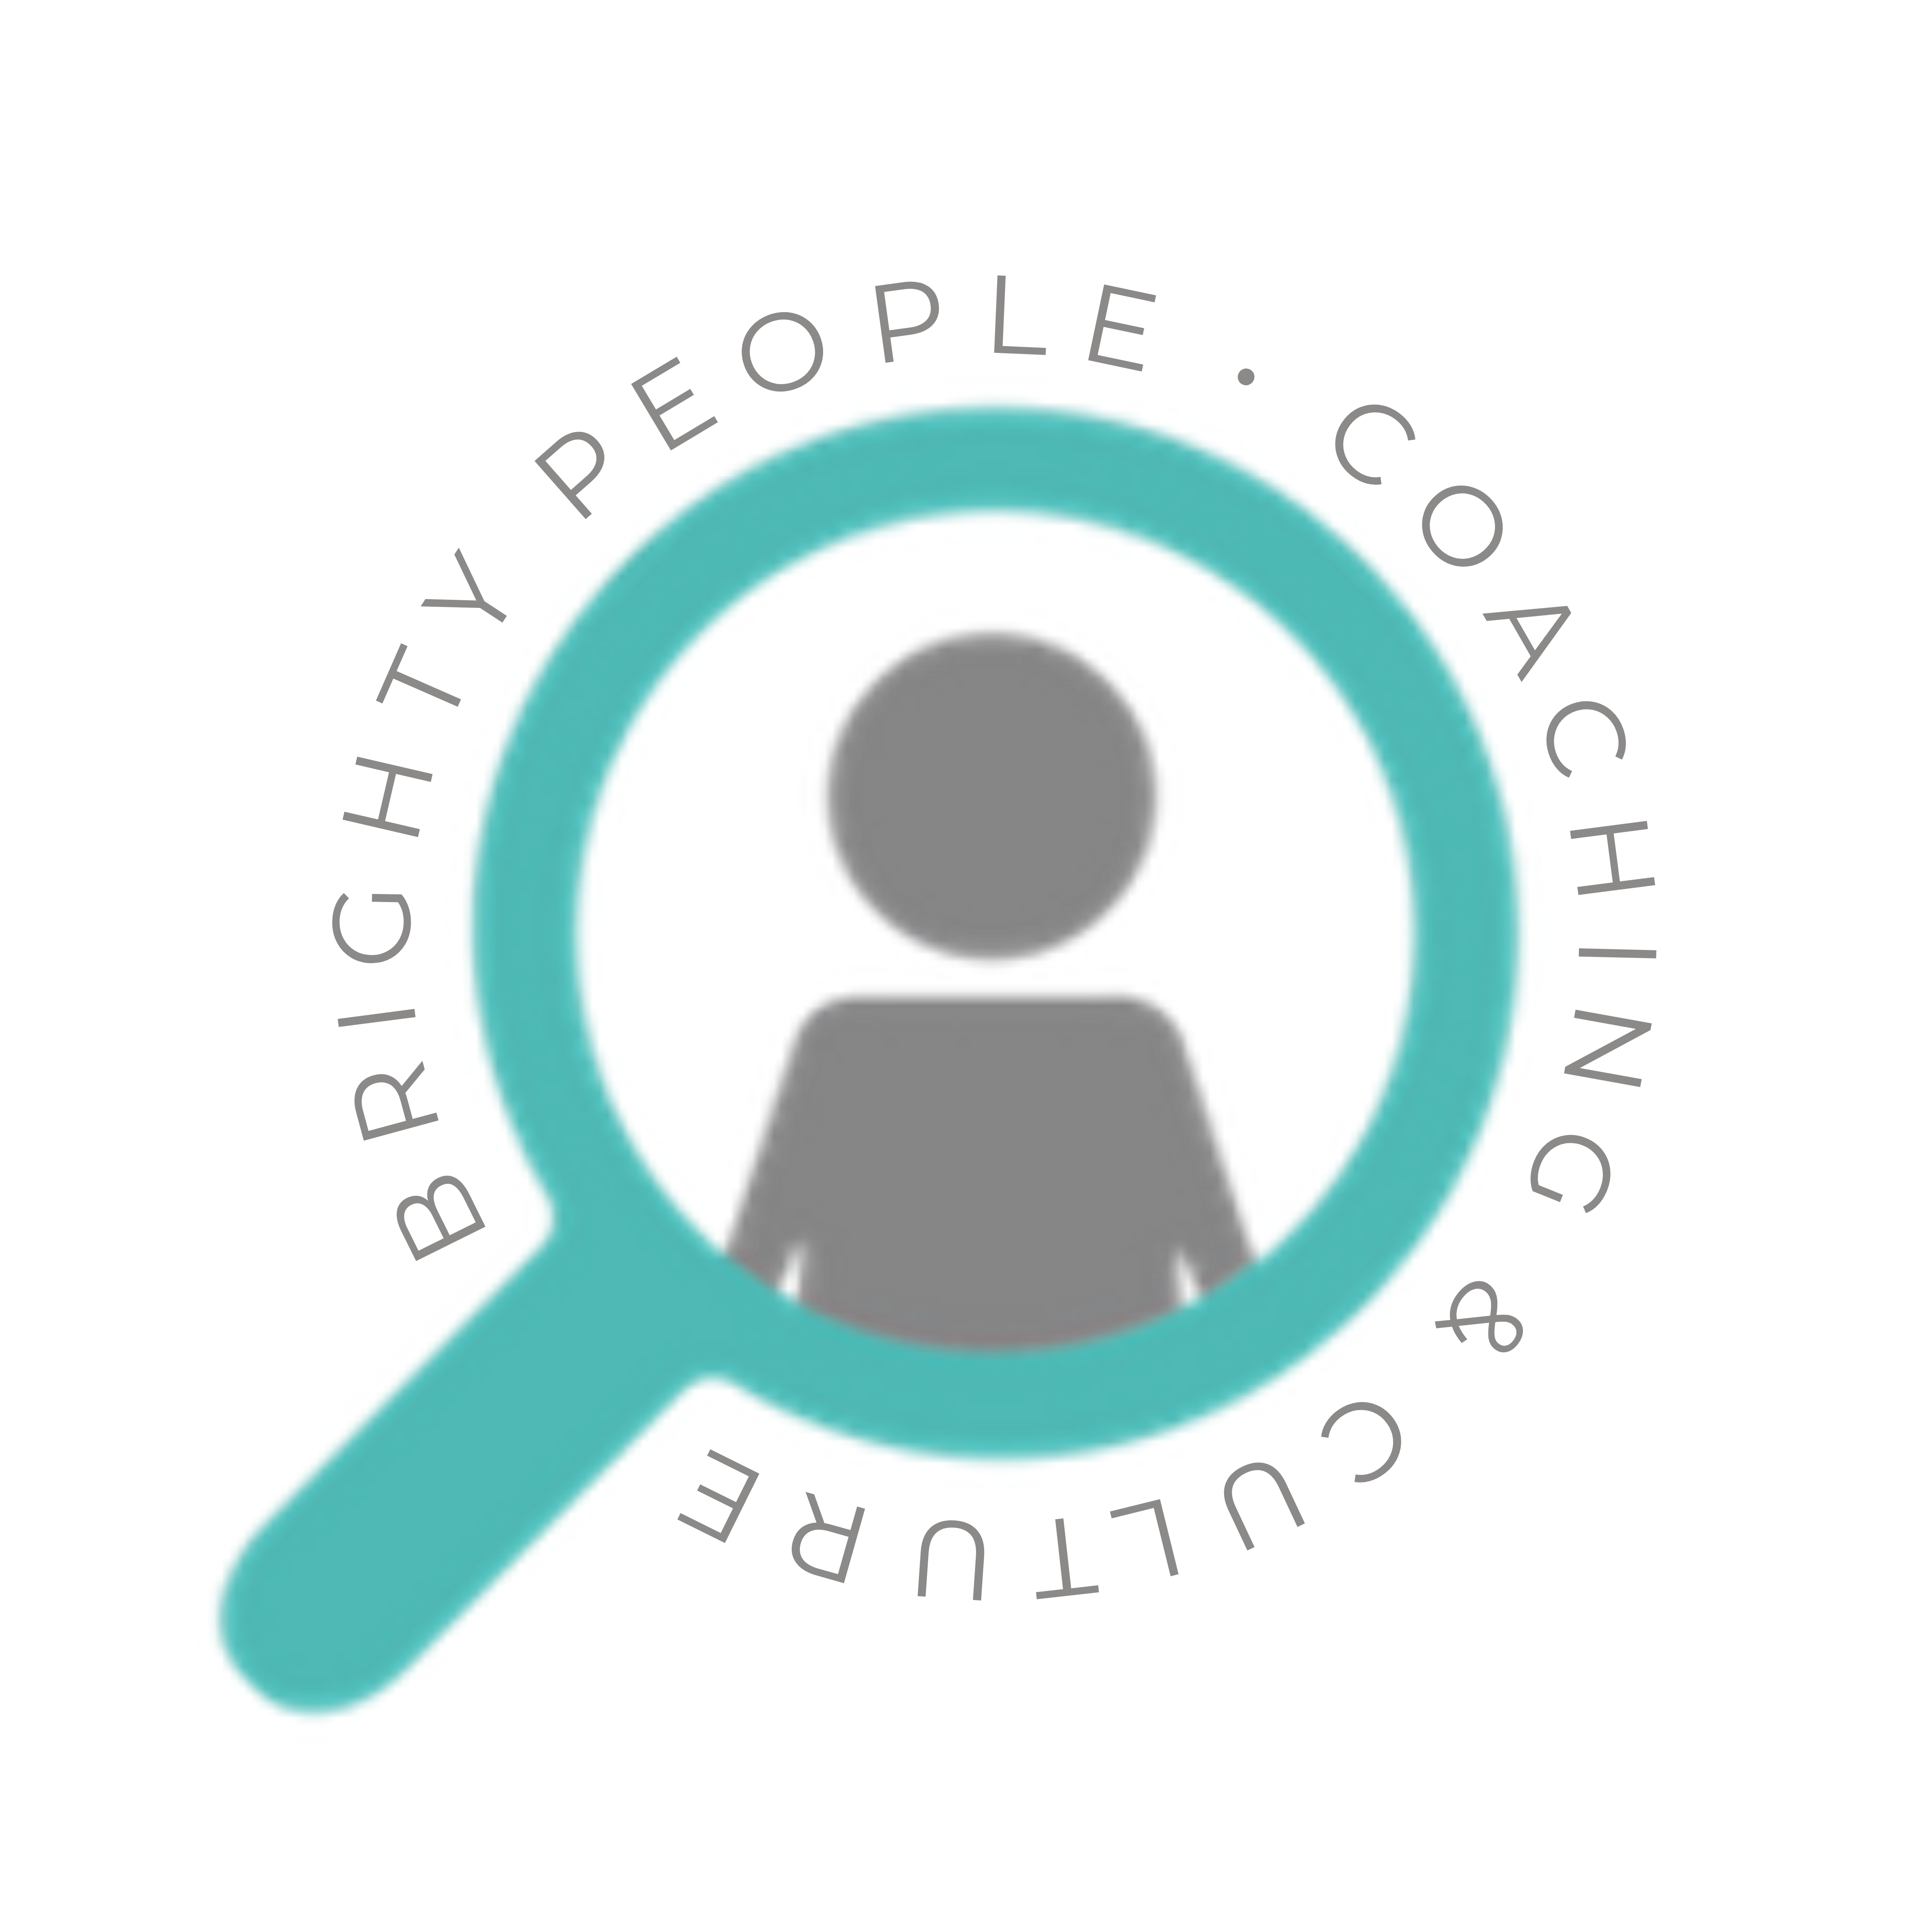 7207Brighty People presents: The People and Culture Forum OCTOBER – Topic TBC